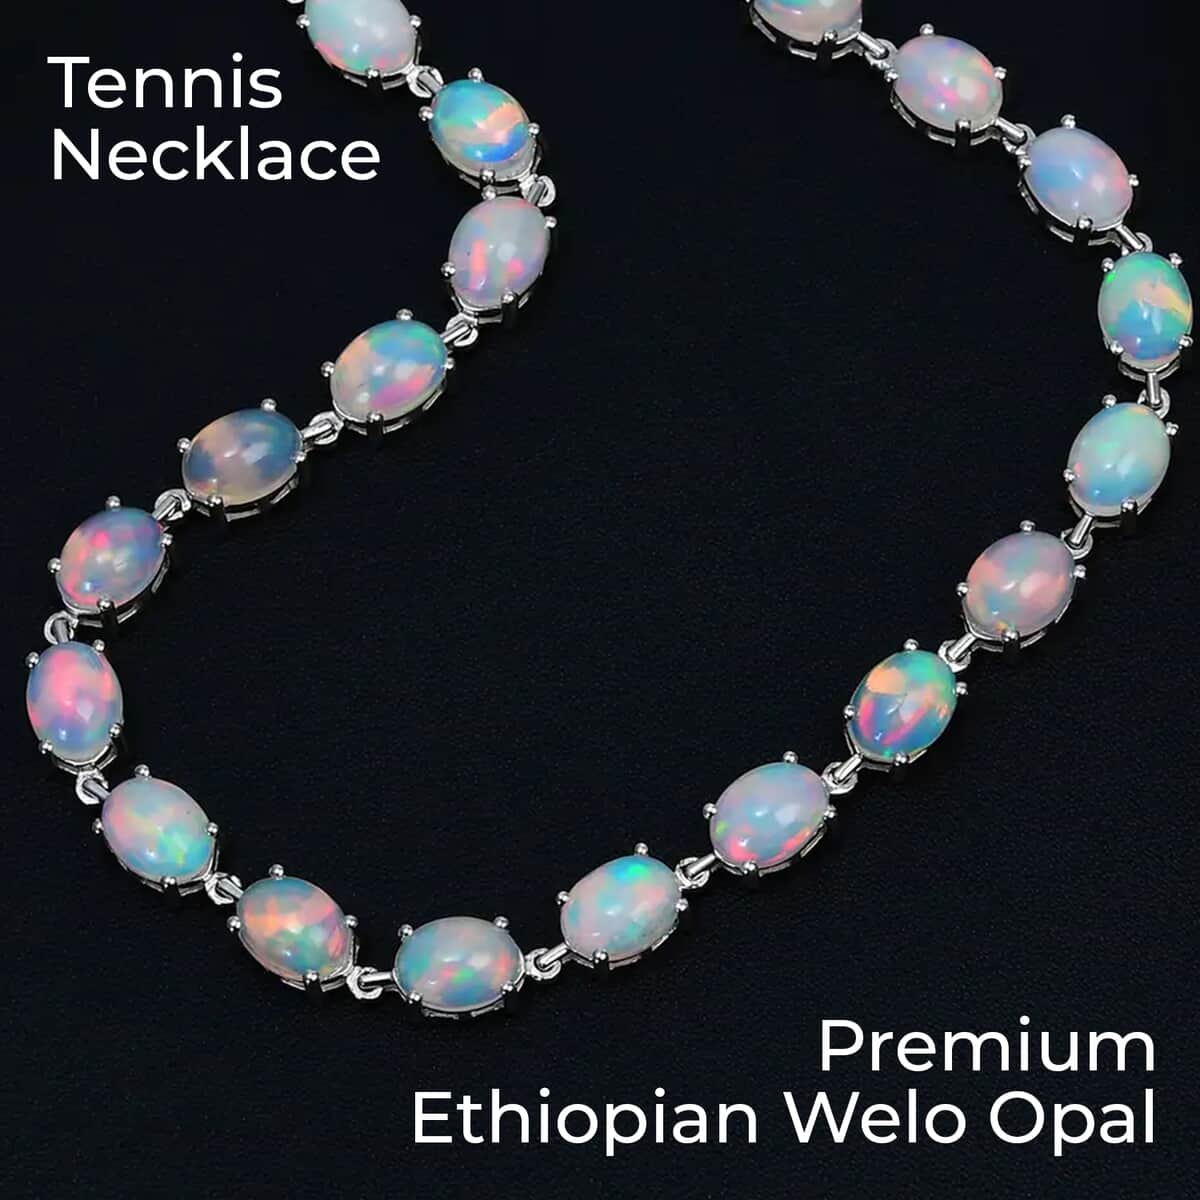 Premium Ethiopian Welo Opal Tennis Necklace in Platinum Over Sterling Silver, Tennis Necklace 41.00 ctw (18 Inches) image number 1